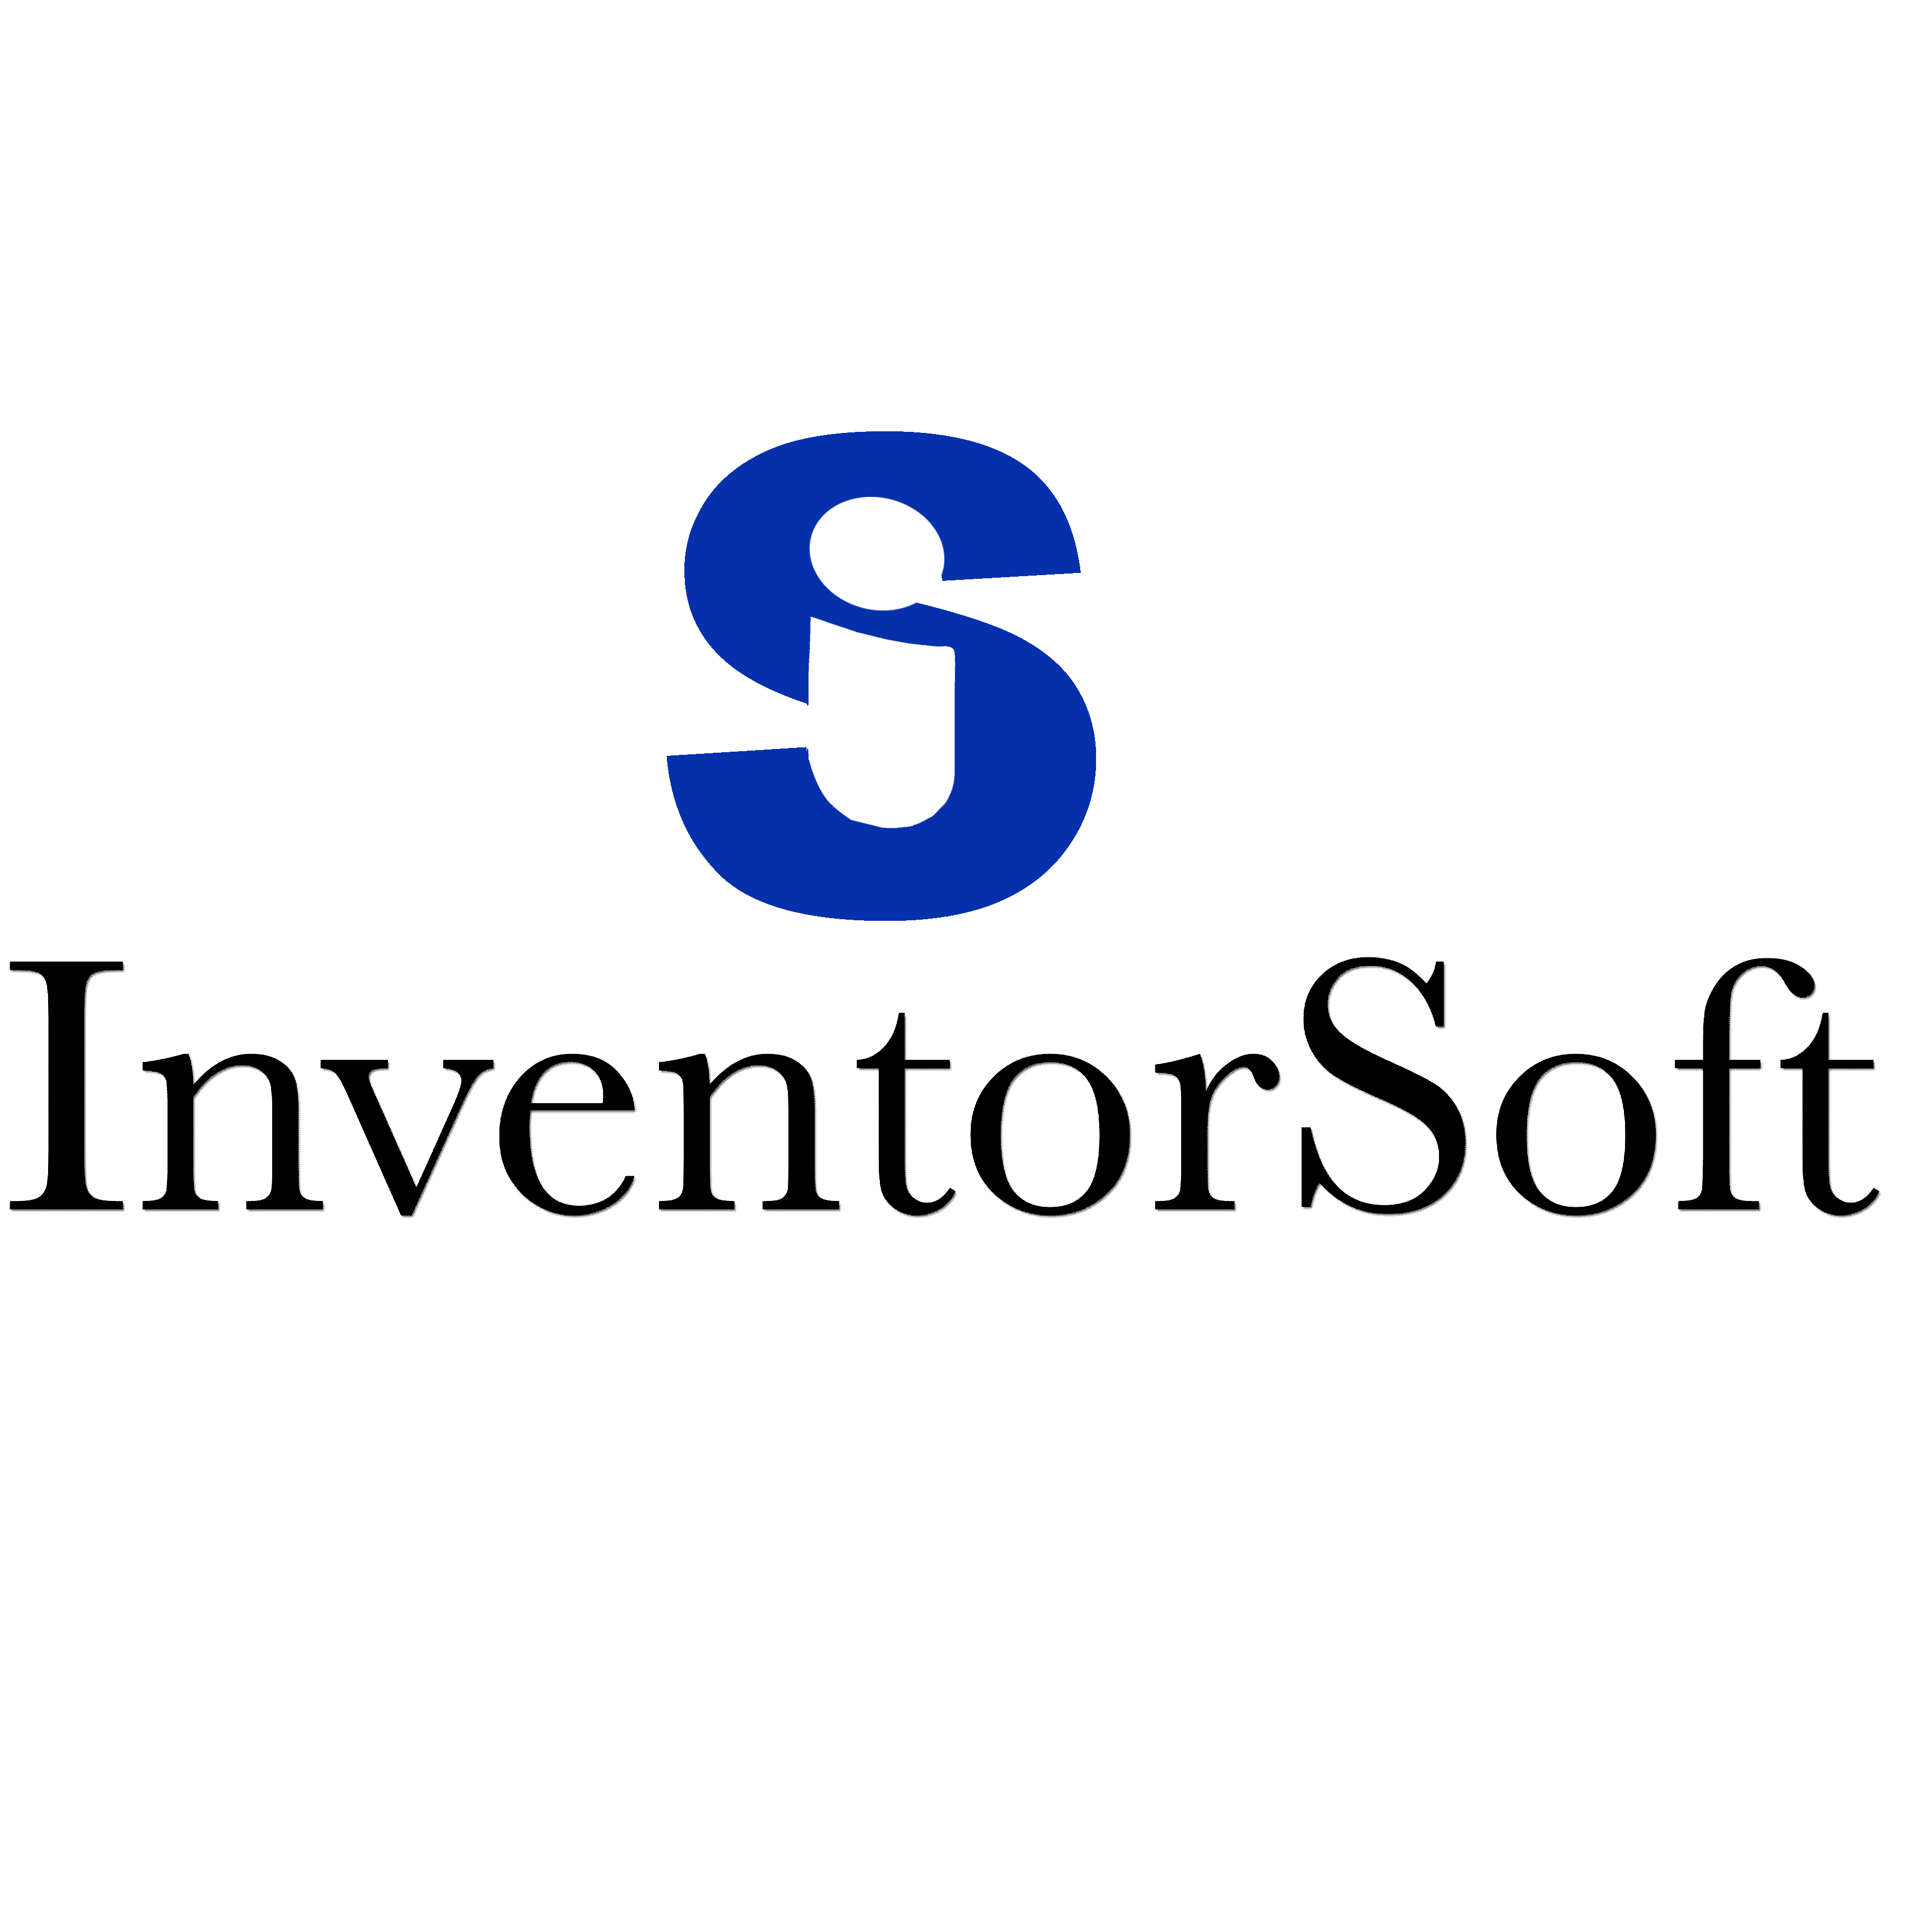 InventorSoft profile on Qualified.One